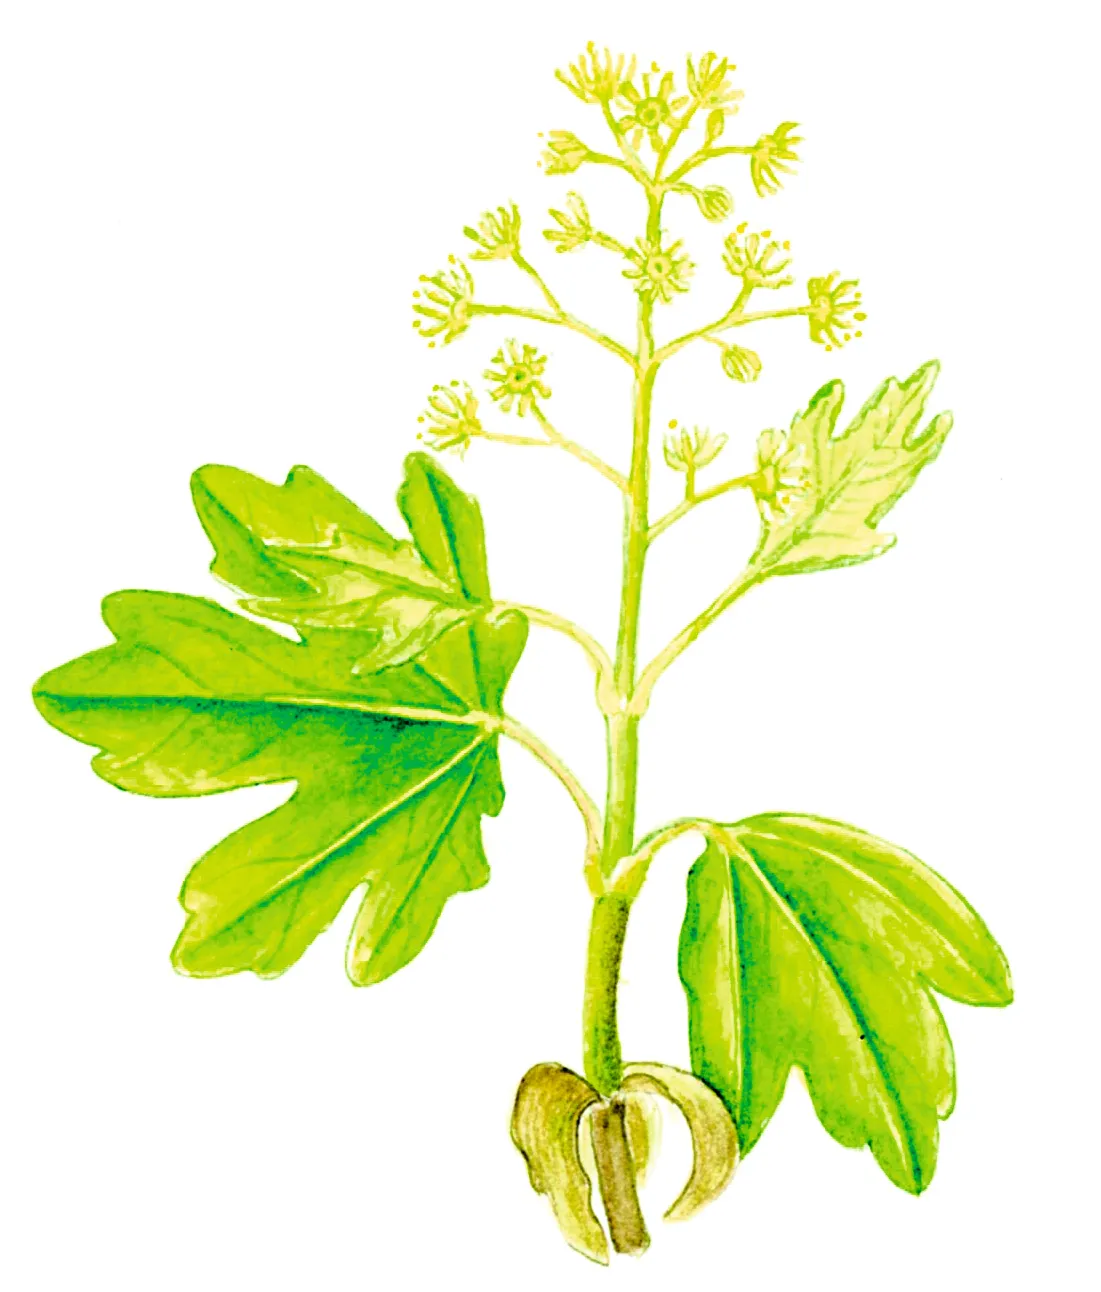 Illustration of field maple blossom and leaves.